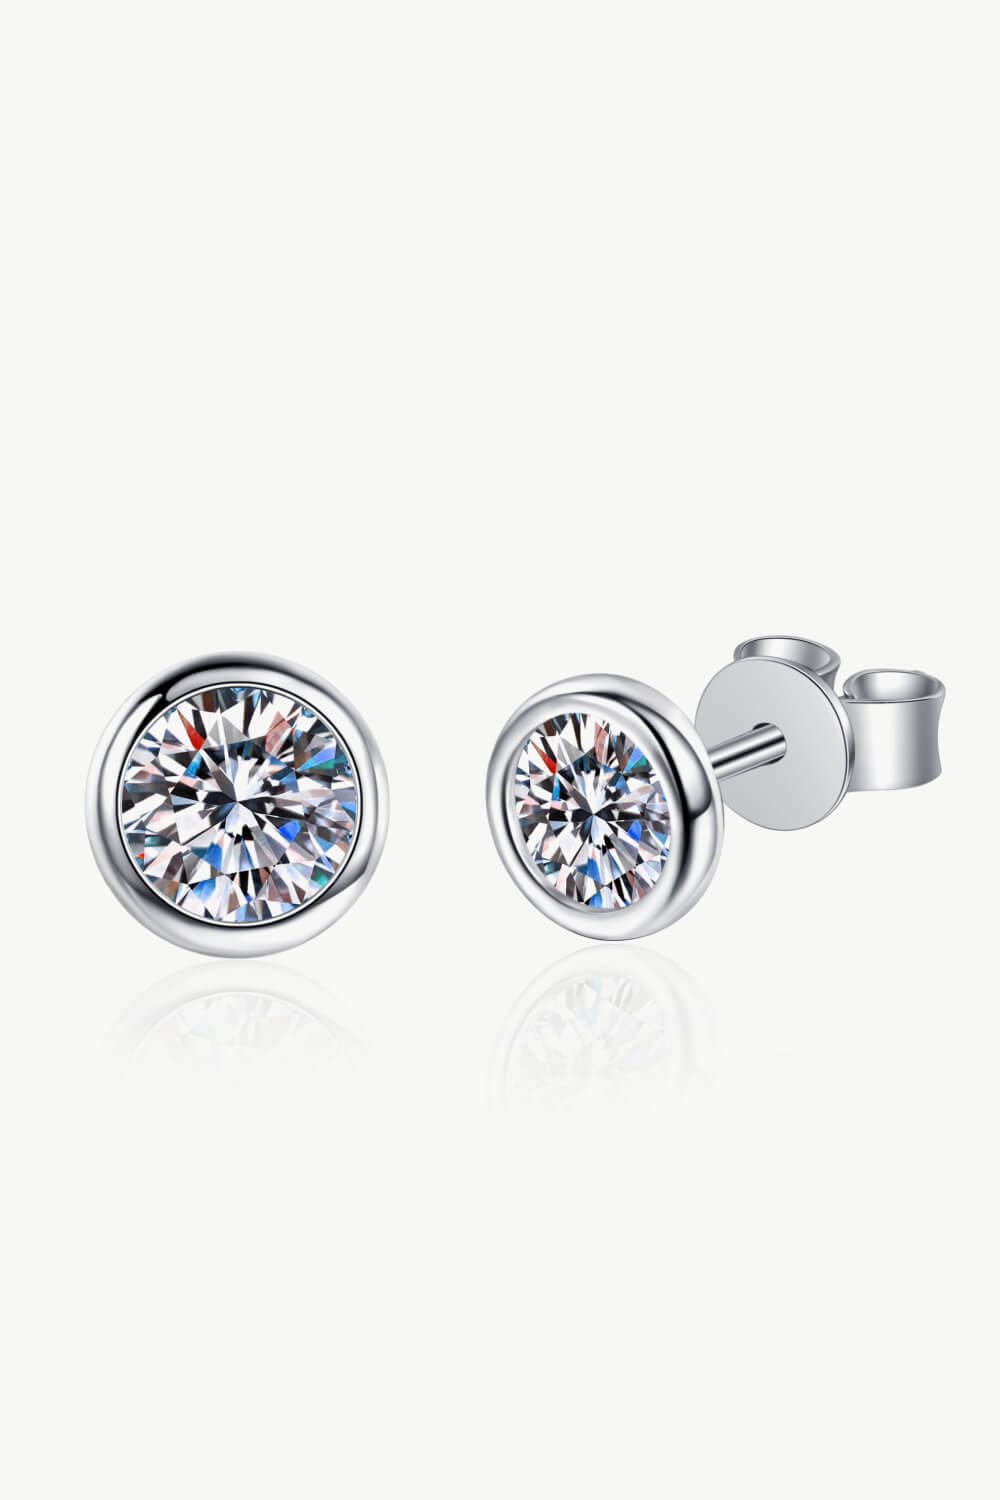 Inlaid 1 Carat Moissanite Stud Earrings BLUE ZONE PLANET